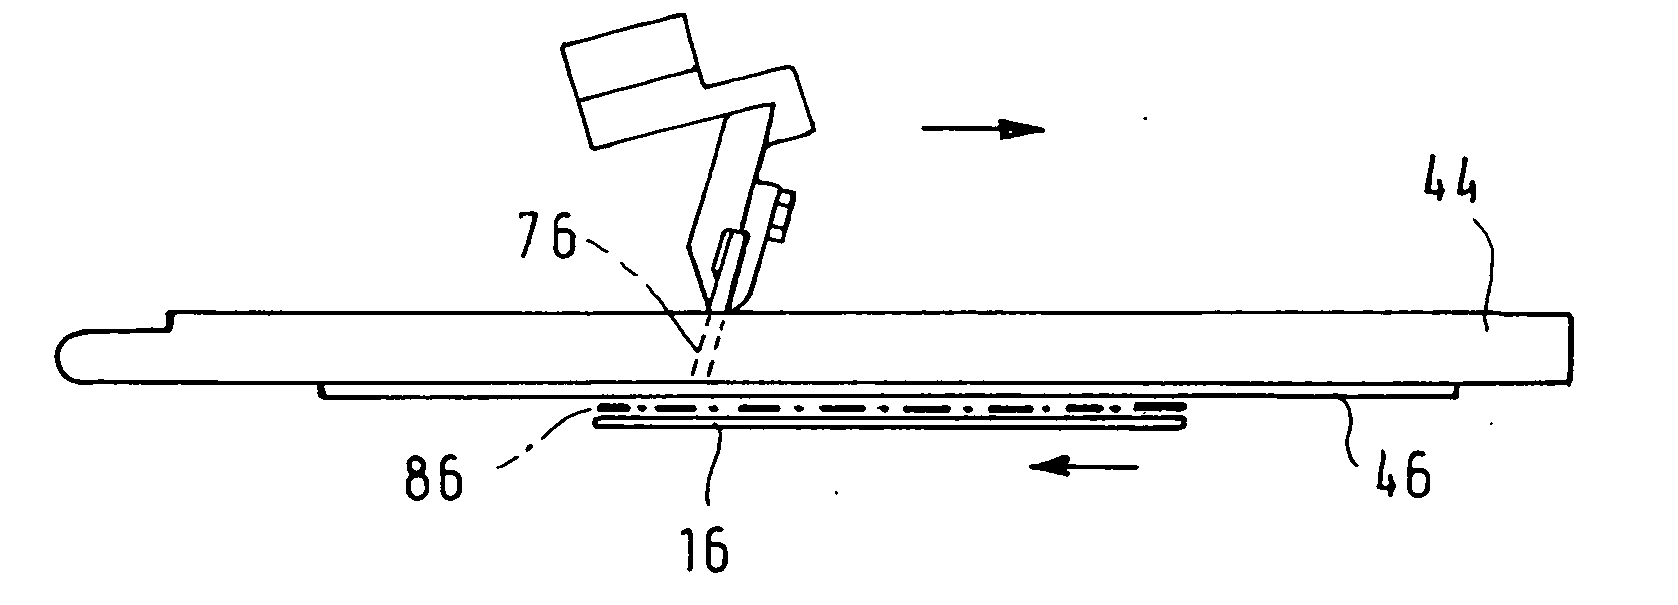 Apparatus for decorating stiff objects by screen printing